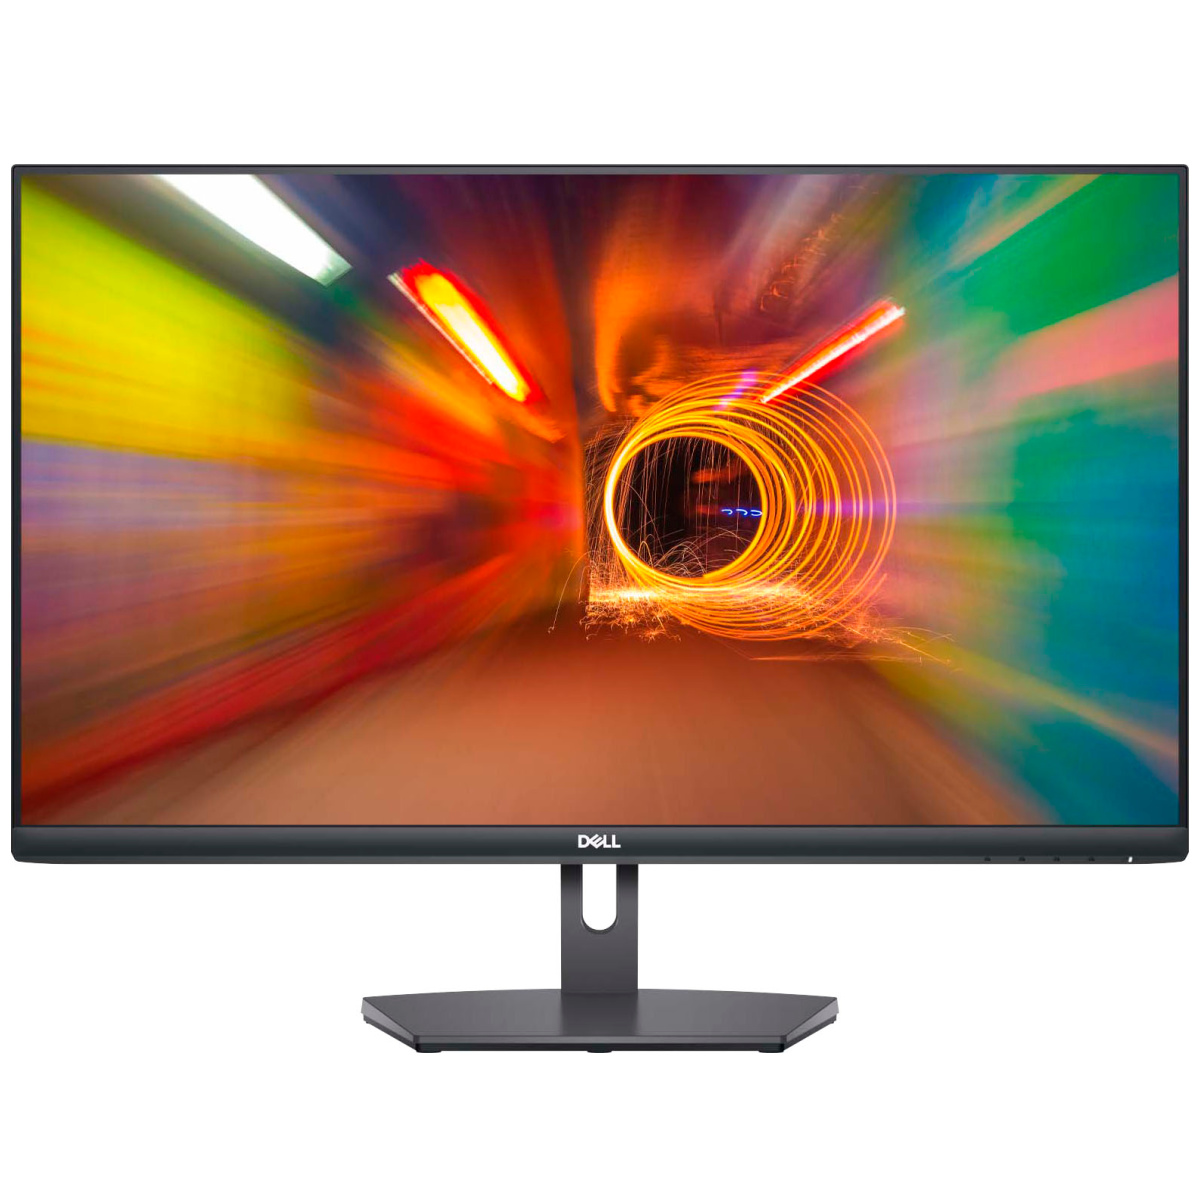 Dell S2721NX 27-Inch IPS LED FHD Monitor